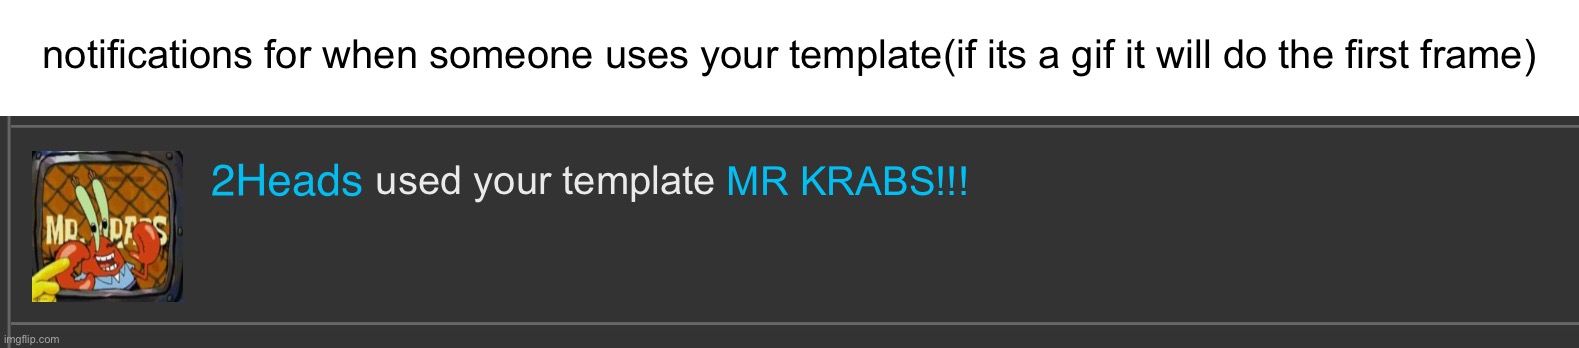 notifications for when someone uses your template(if its a gif it will do the first frame); MR KRABS!!! used your template | image tagged in notifications,idea,template notifications | made w/ Imgflip meme maker